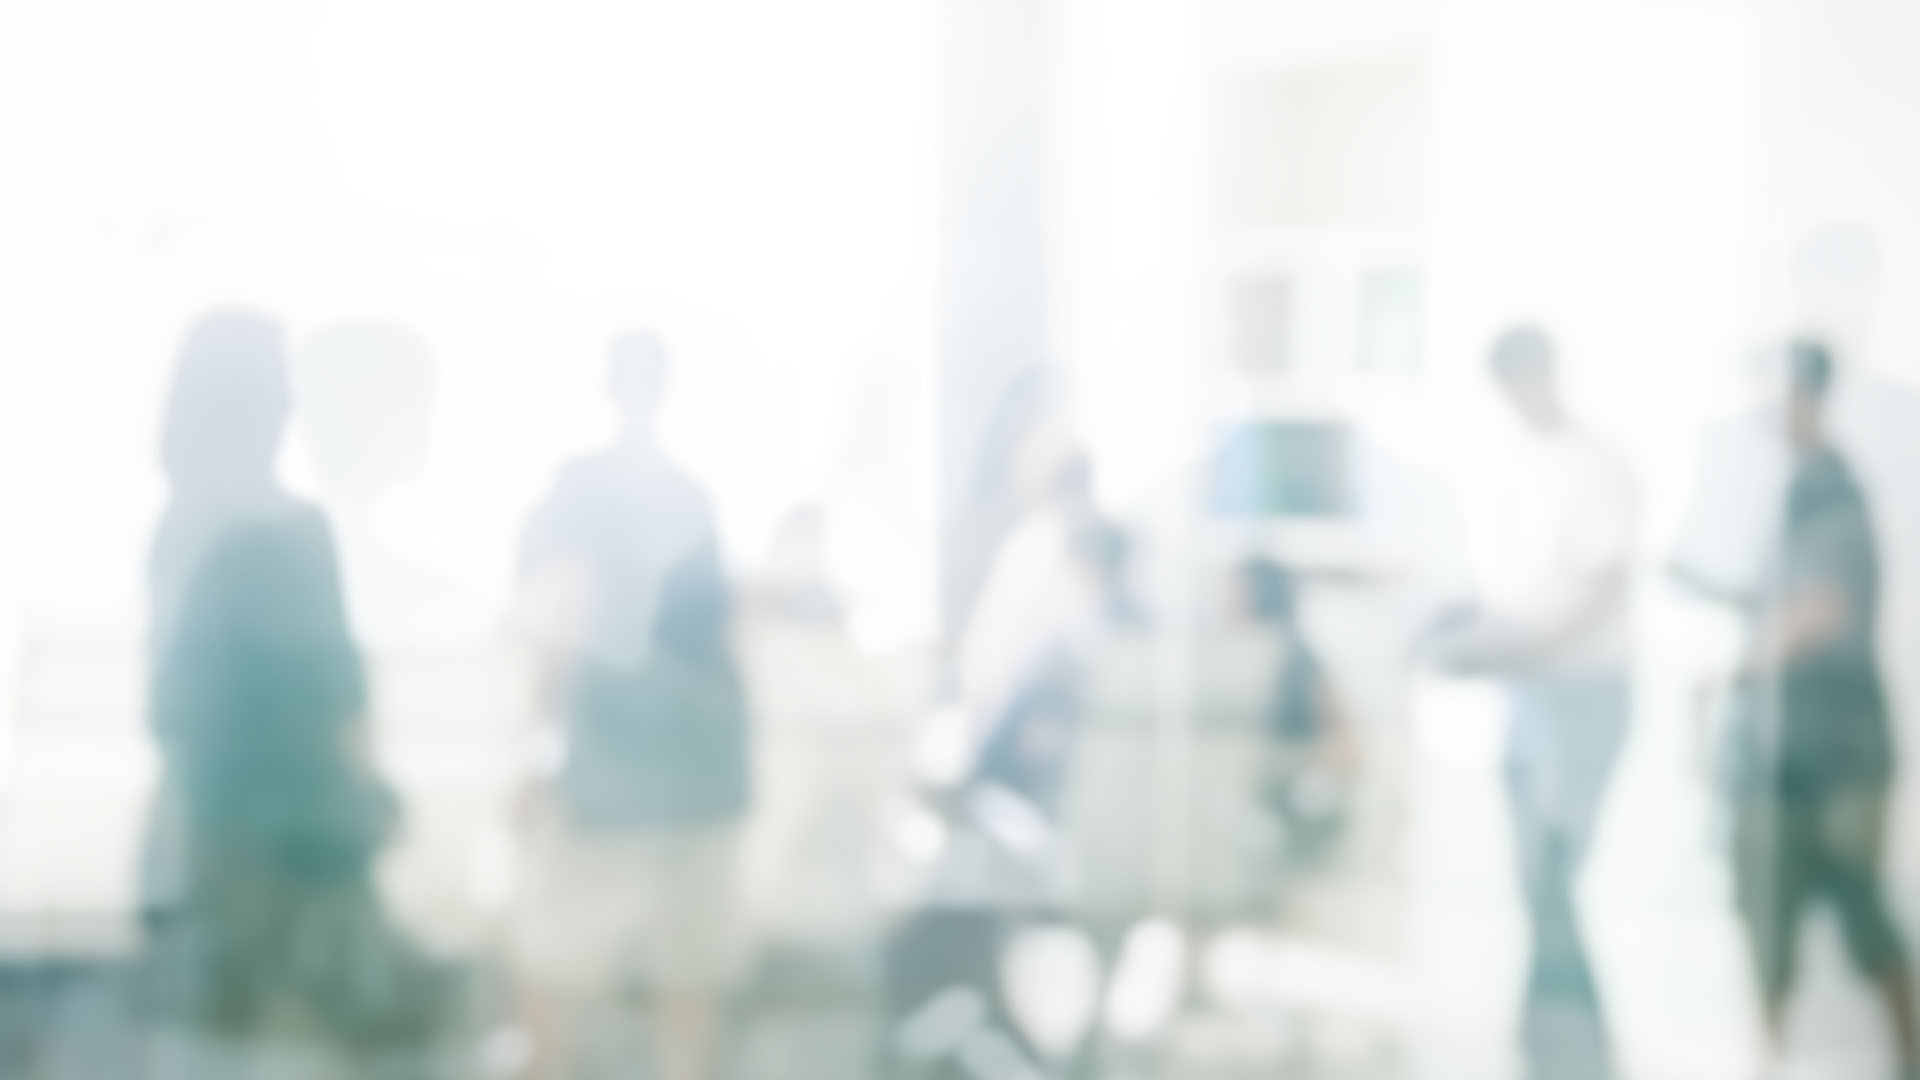 abstract blurry window of people coming together in an office meeting room